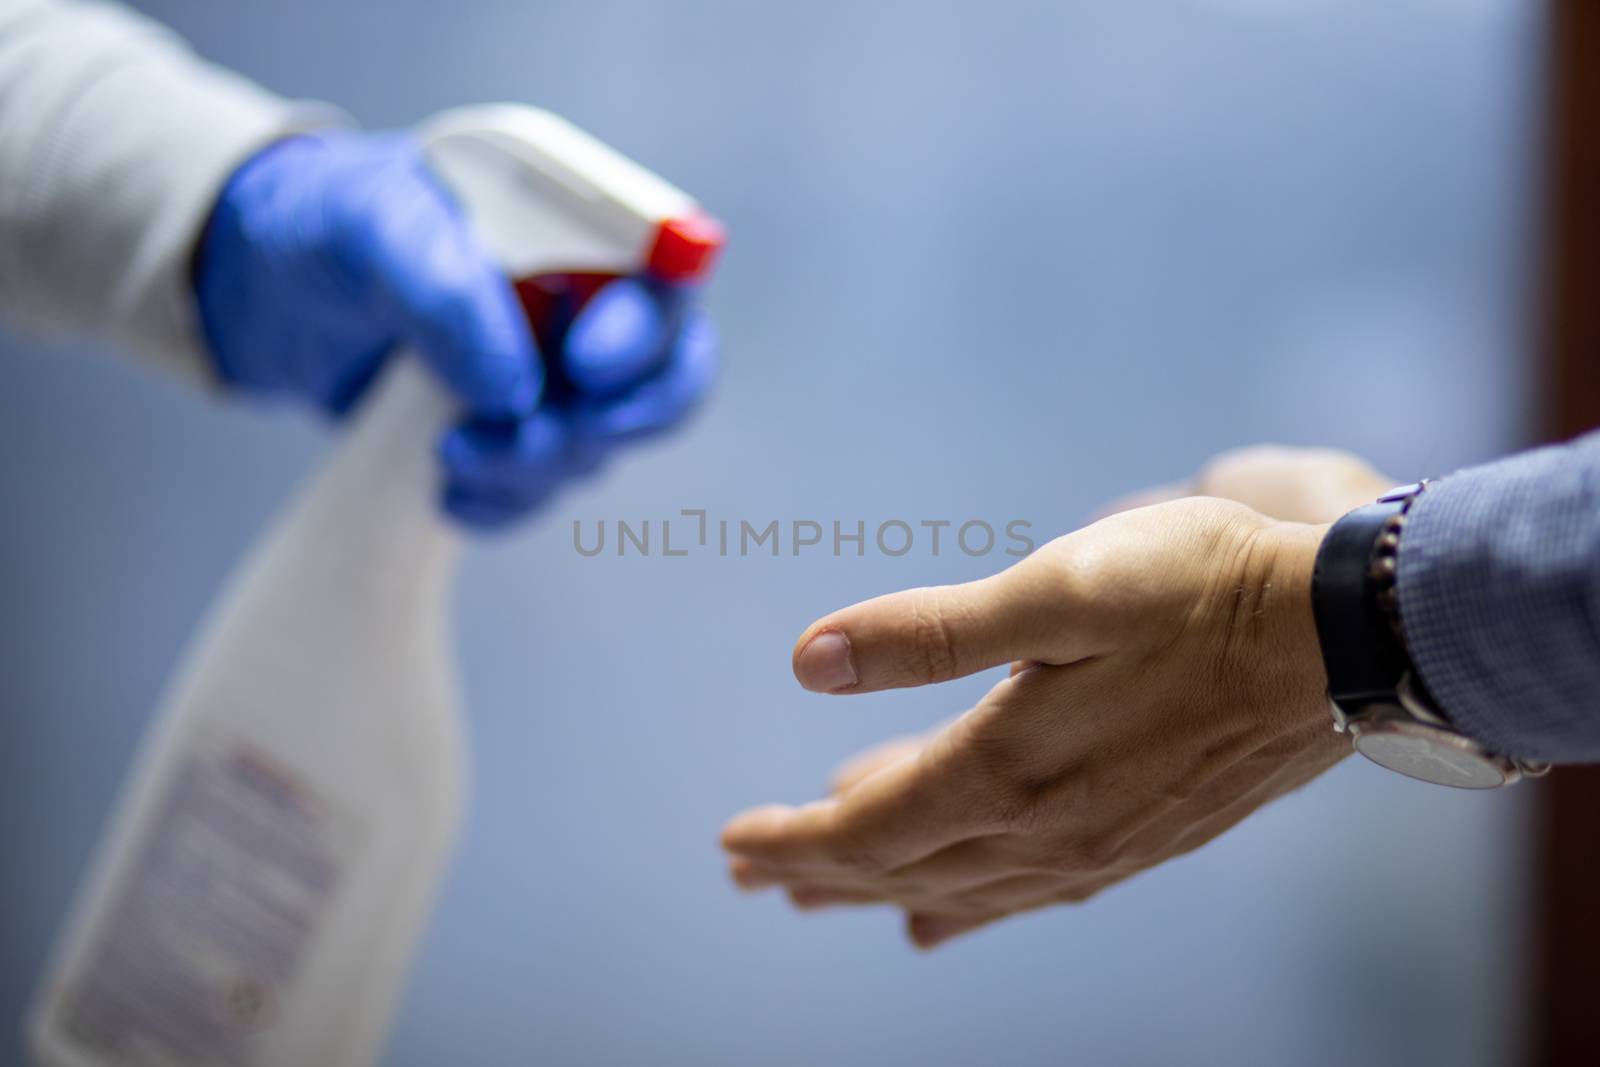 Spraying hands with antiseptic solution